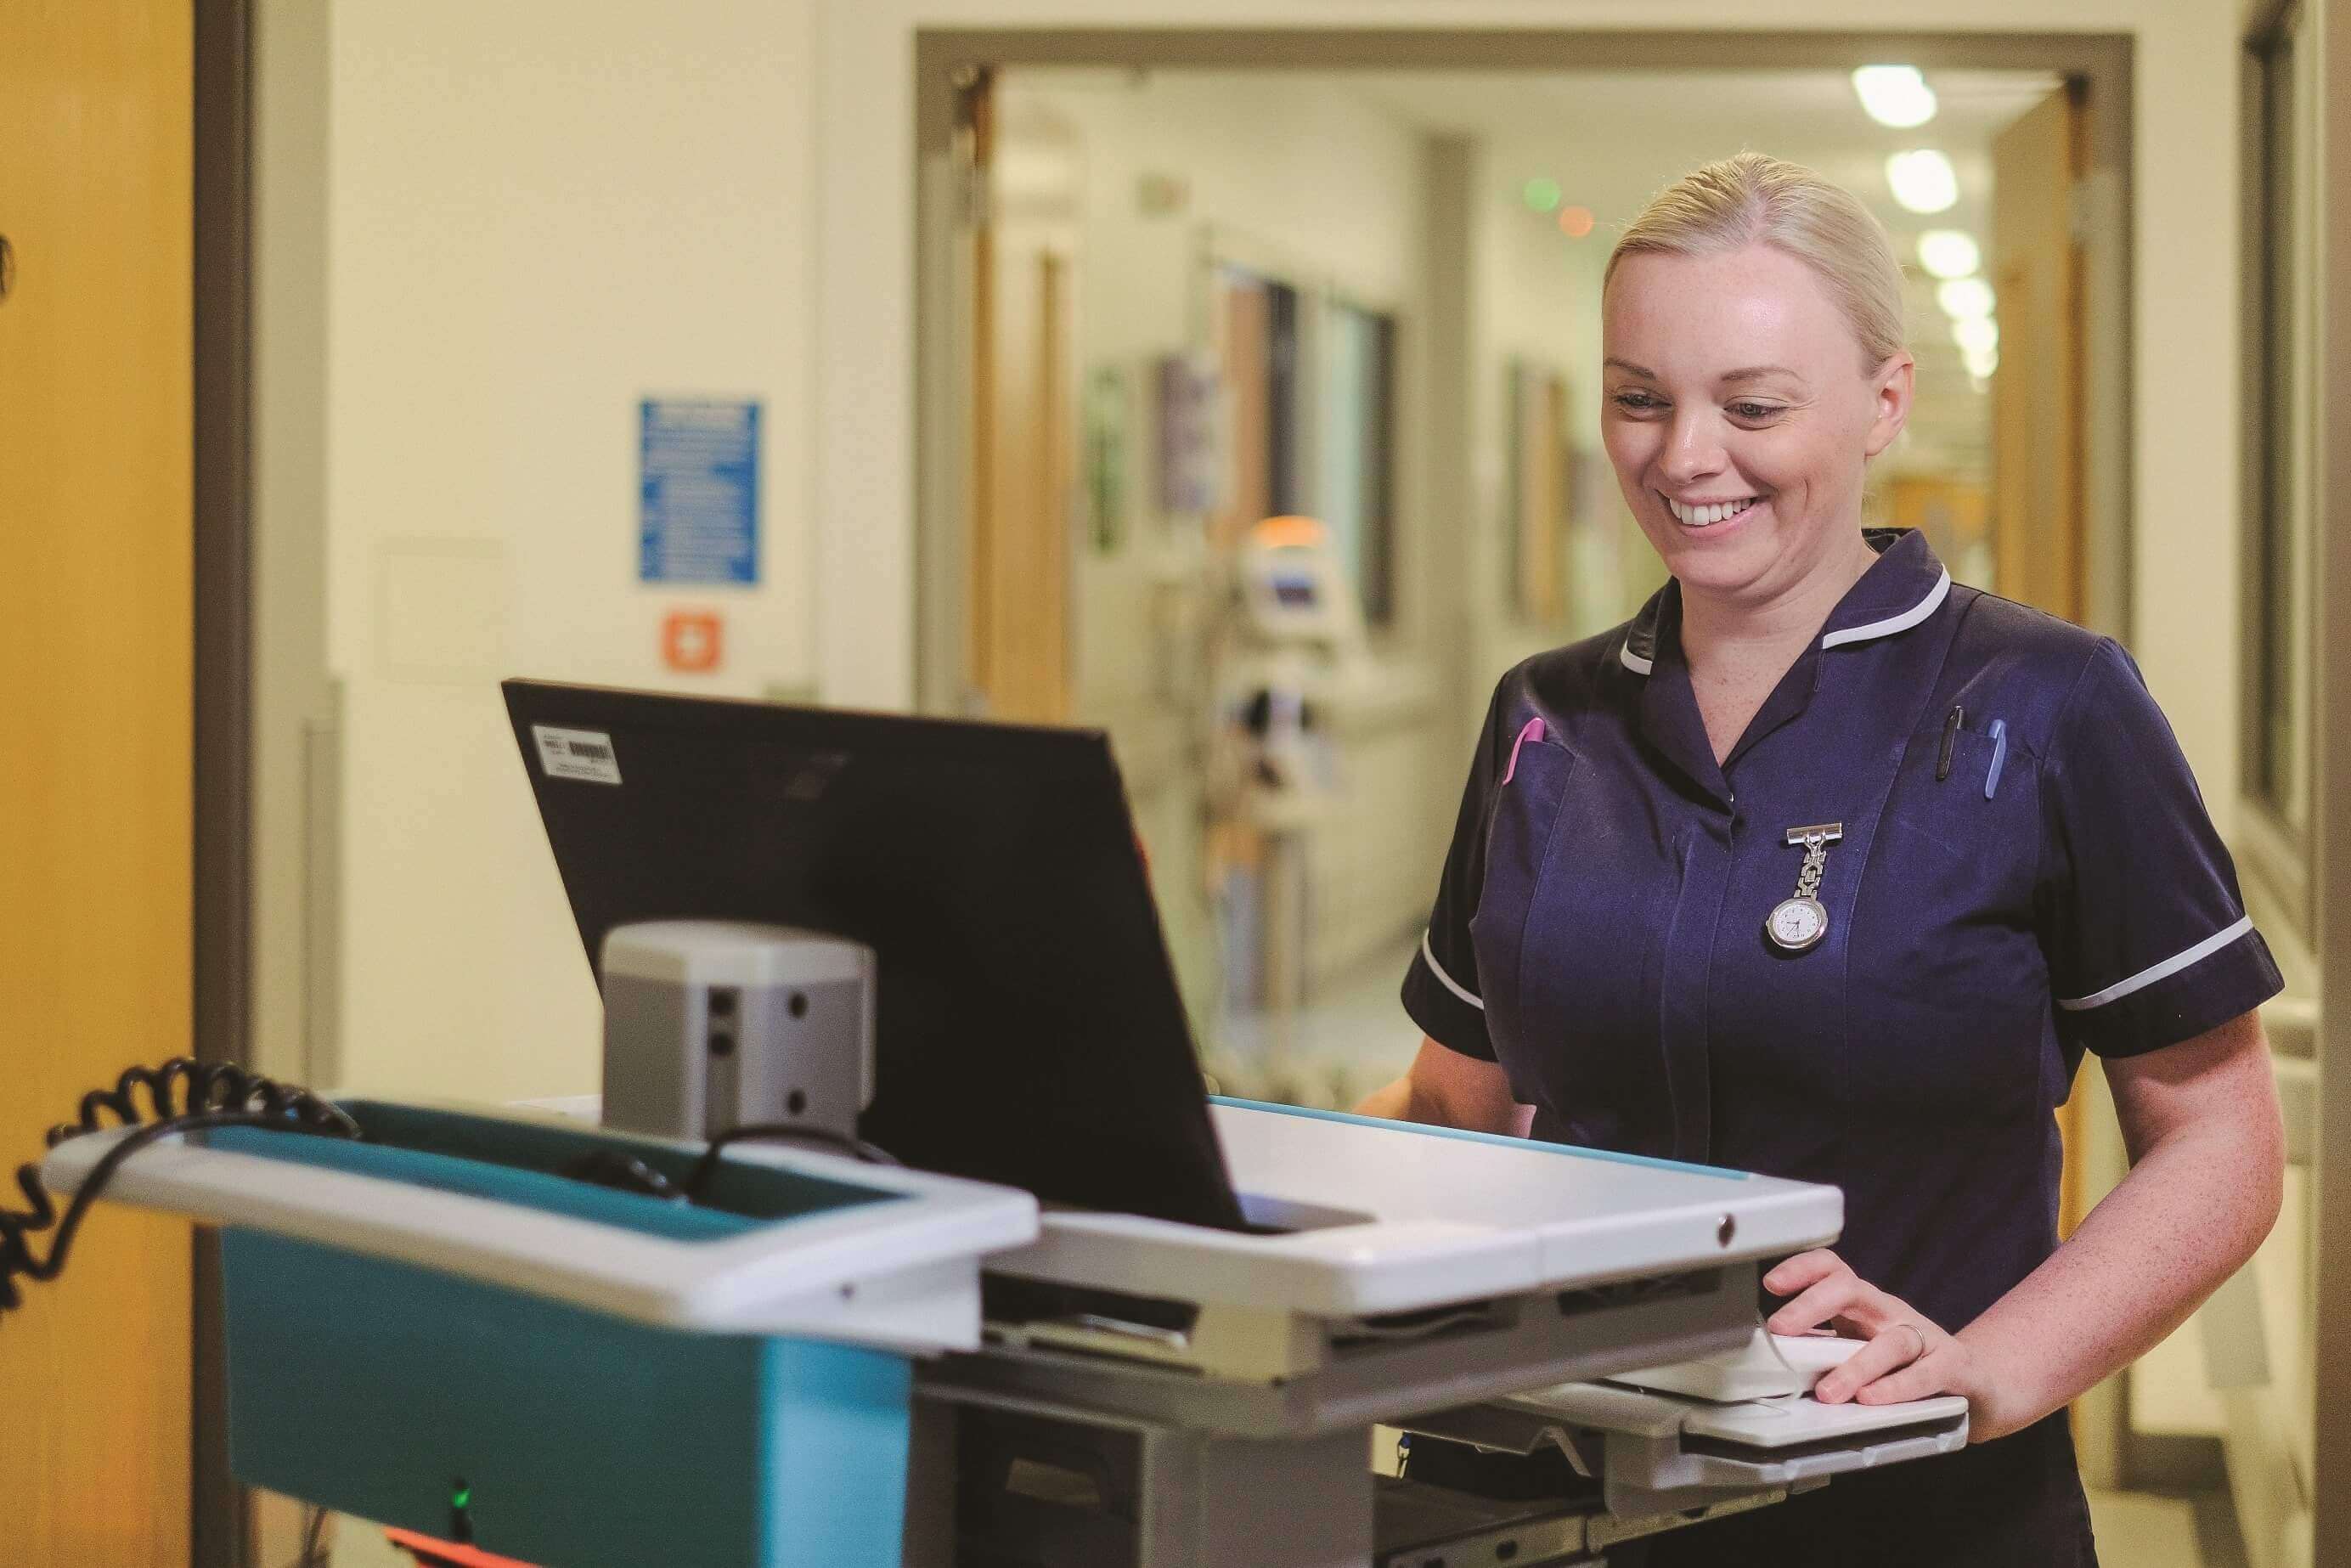 Newcastle Upon Tyne Hospitals NHS Foundation Trust implements e-Rostering to boost patient care and budget efficiency